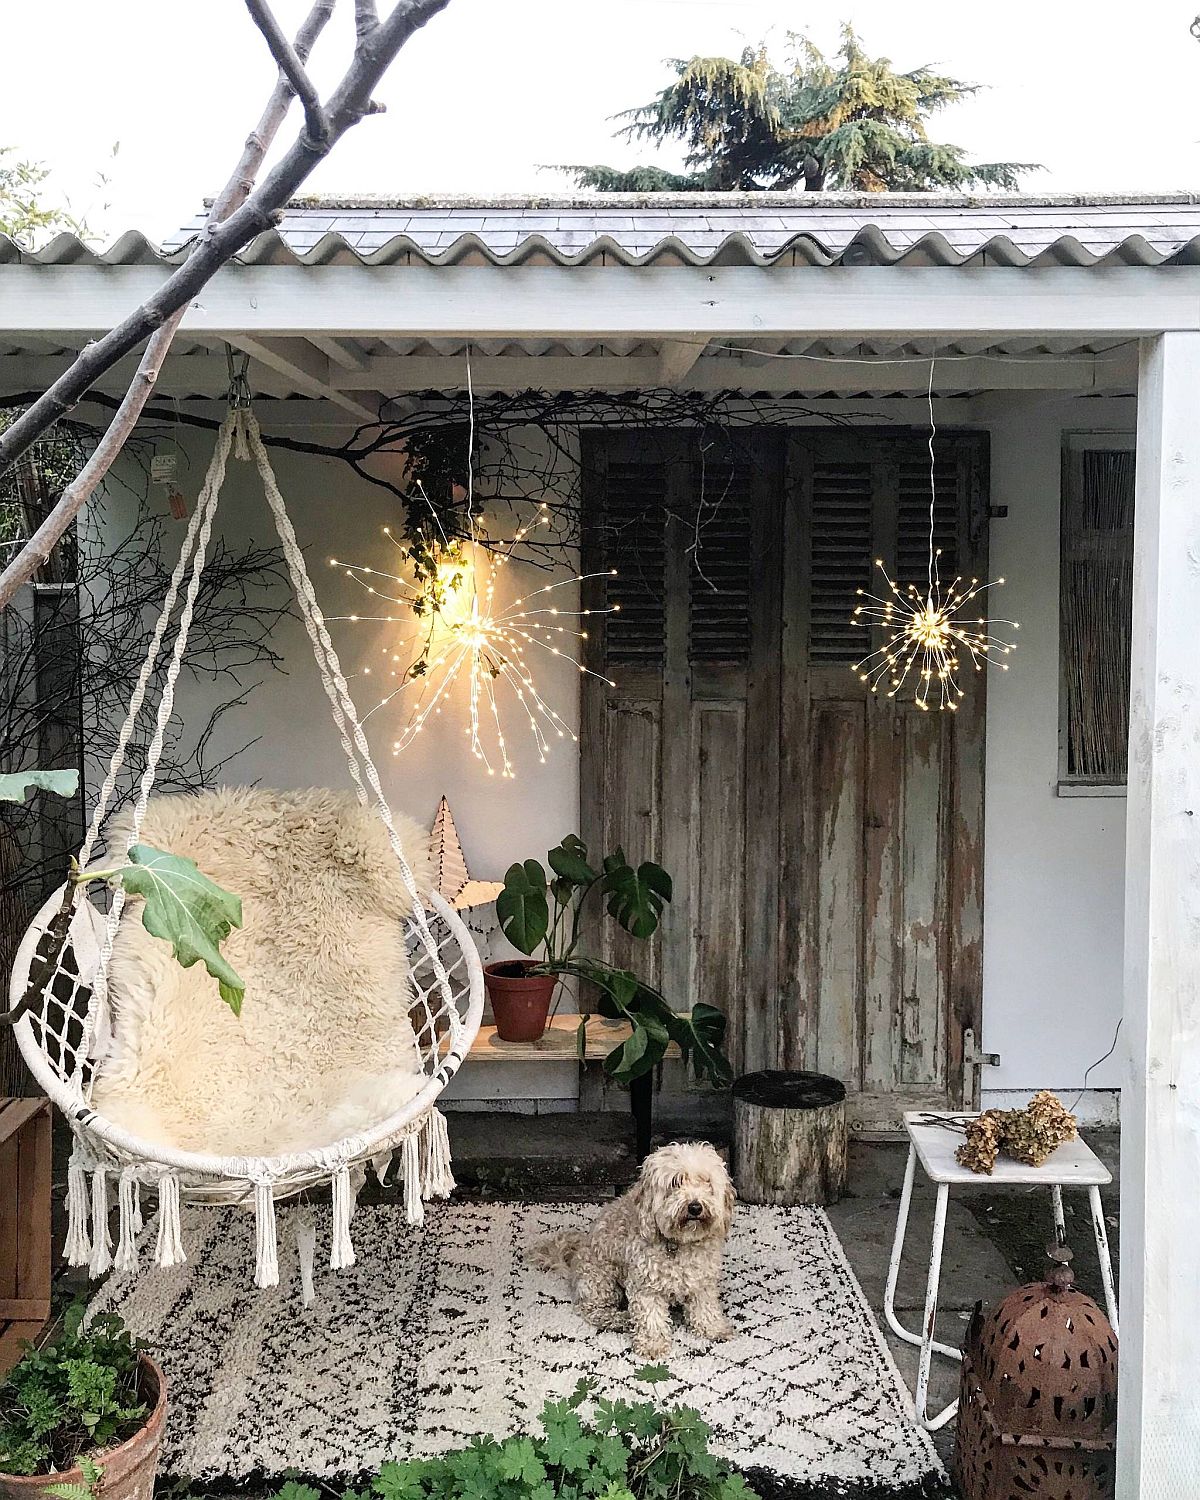 An-eclectic-mix-of-decor-coupled-with-greenery-creates-this-relaxing-shabby-chic-patio-66045